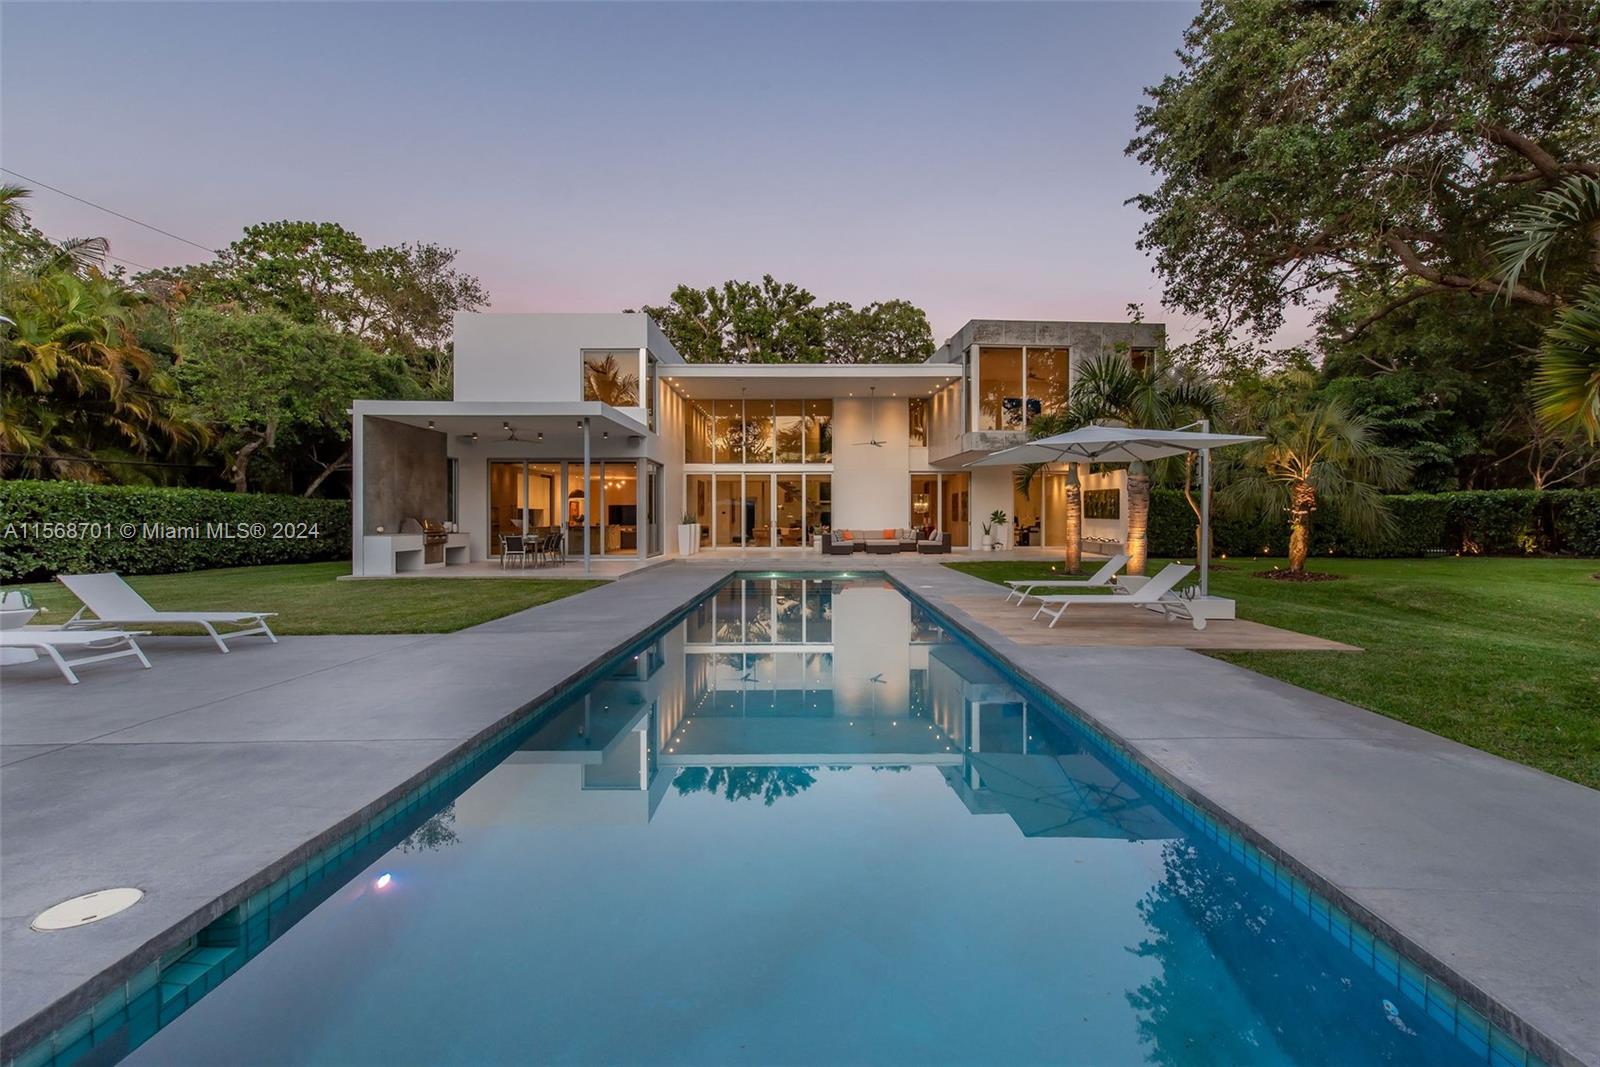 A contemporary masterpiece in the sought-after neighborhood of Pinecrest. This Bauhaus style property features glass walls that bring in natural light and offer breathtaking views of the pool, guest house, and beautiful landscape. This gem also has 6 bedrooms, 6 bathrooms, a full-sized guest house, oversized garage and a fully equipped outdoor kitchen. The living areas and German Leicht-designed kitchen are ideal for hosting. Surrounded by large trees and meticulously landscaped gardens, this private oasis offers a picturesque environment. The large covered terrace, expansive deck, and pool create a seamless indoor/outdoor experience for the perfect retreat. Area: Liv 5,457, Adj 6,327, Total 7,601.